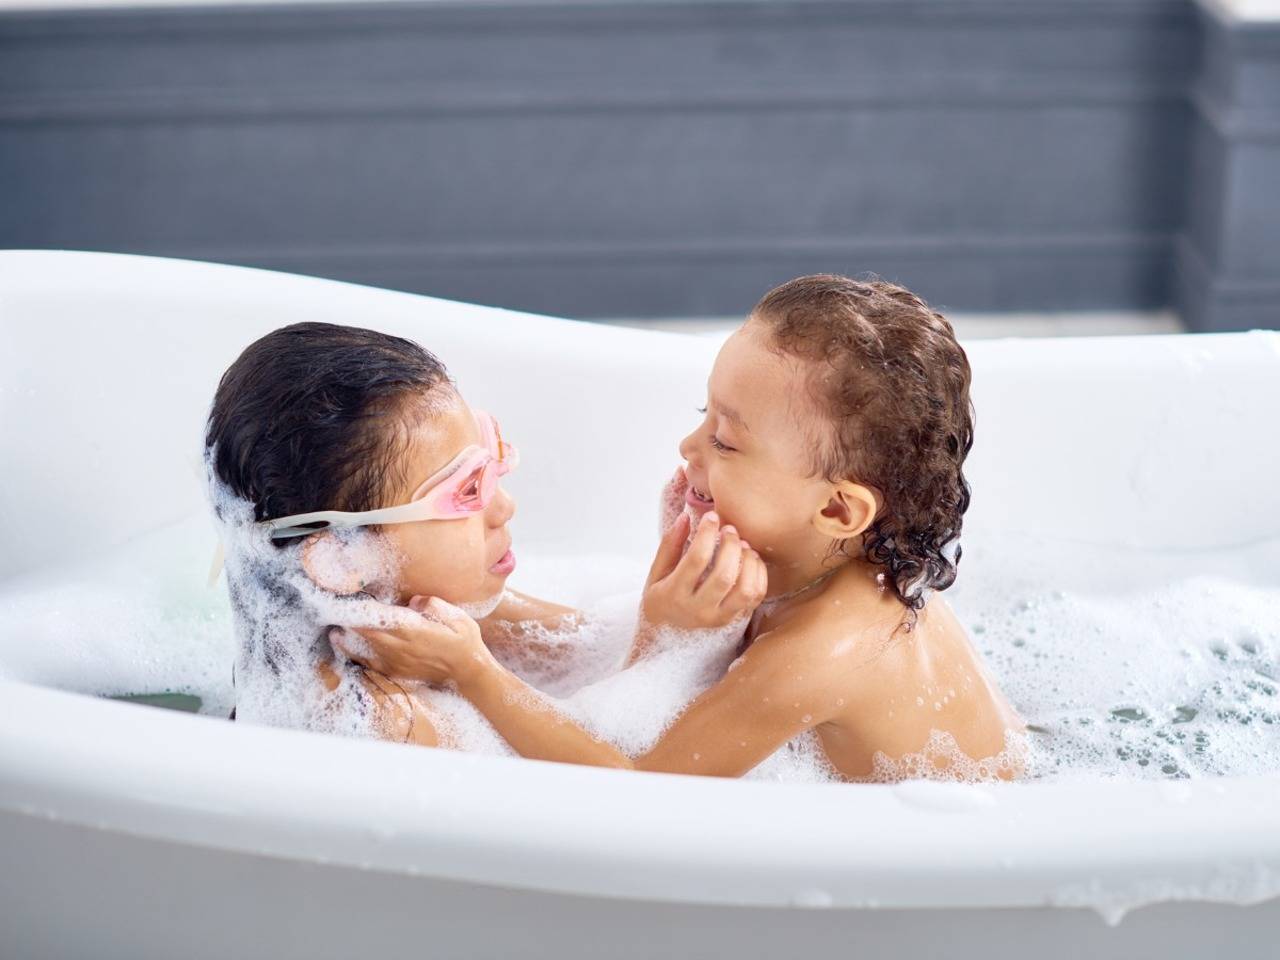 What is the right age for kids to stop bathing together? photo picture